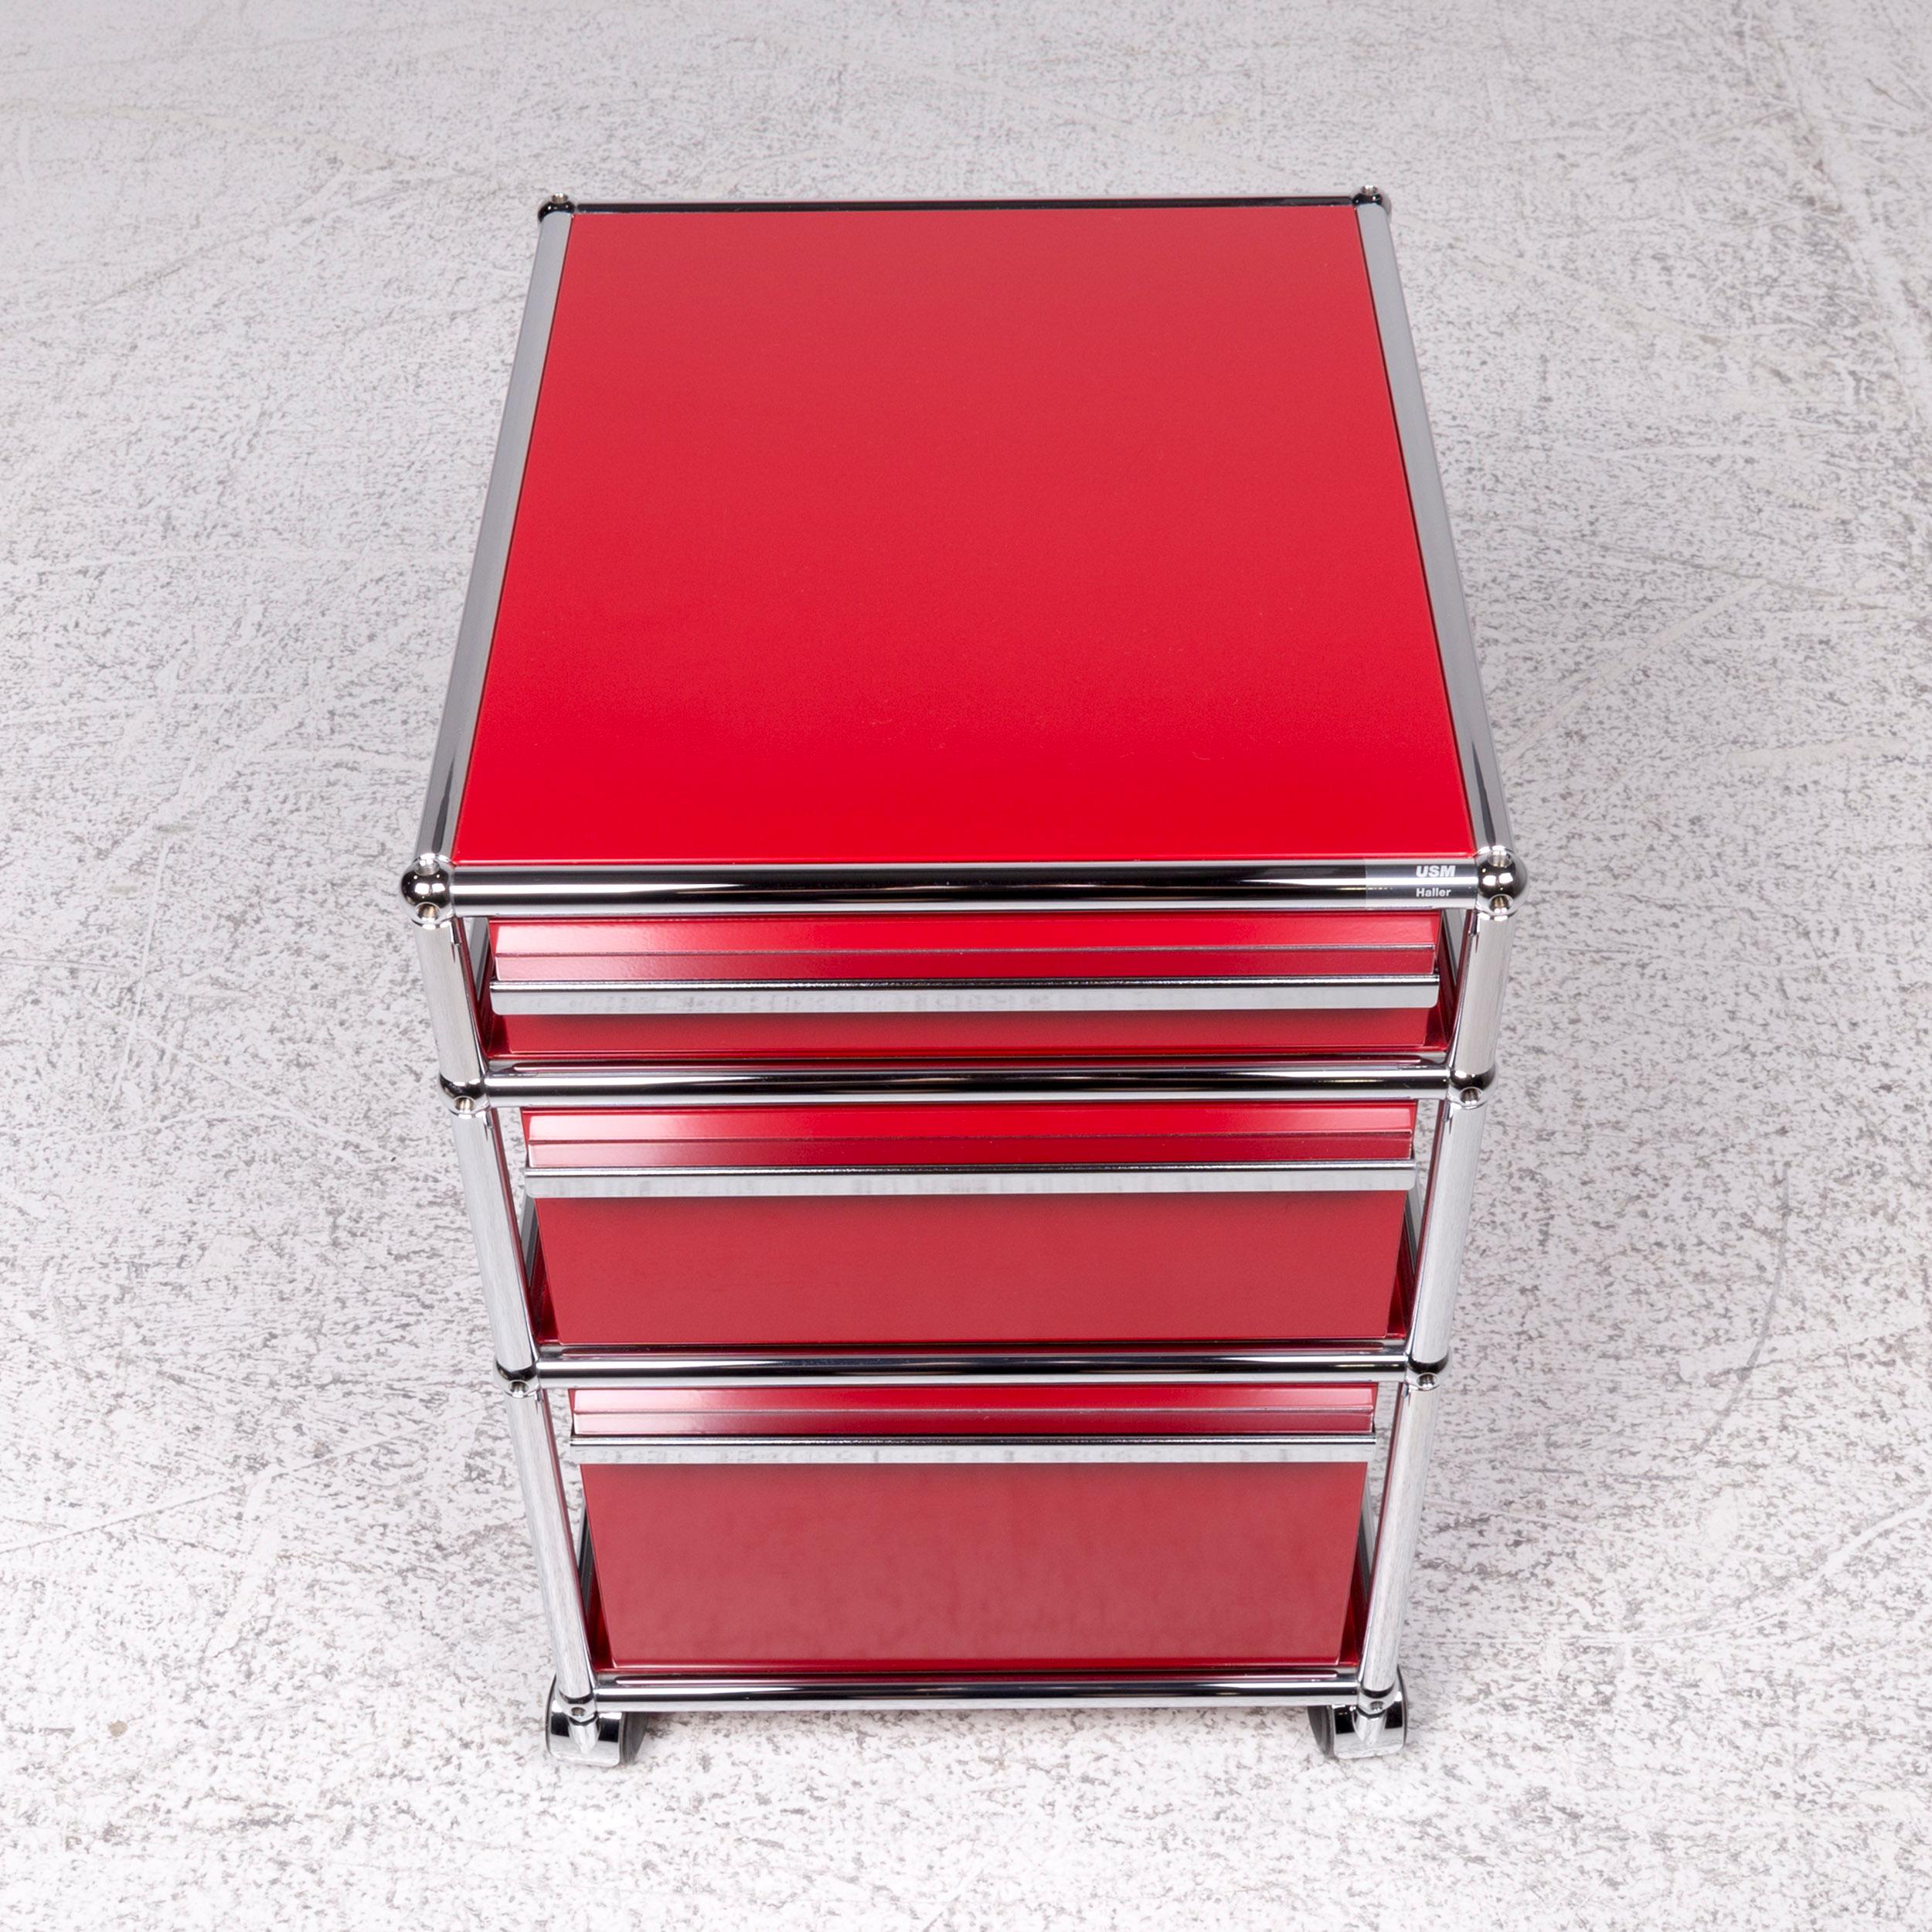 USM Haller Metal Shelf Sideboard Rolling Containers 3 Drawers Red 2